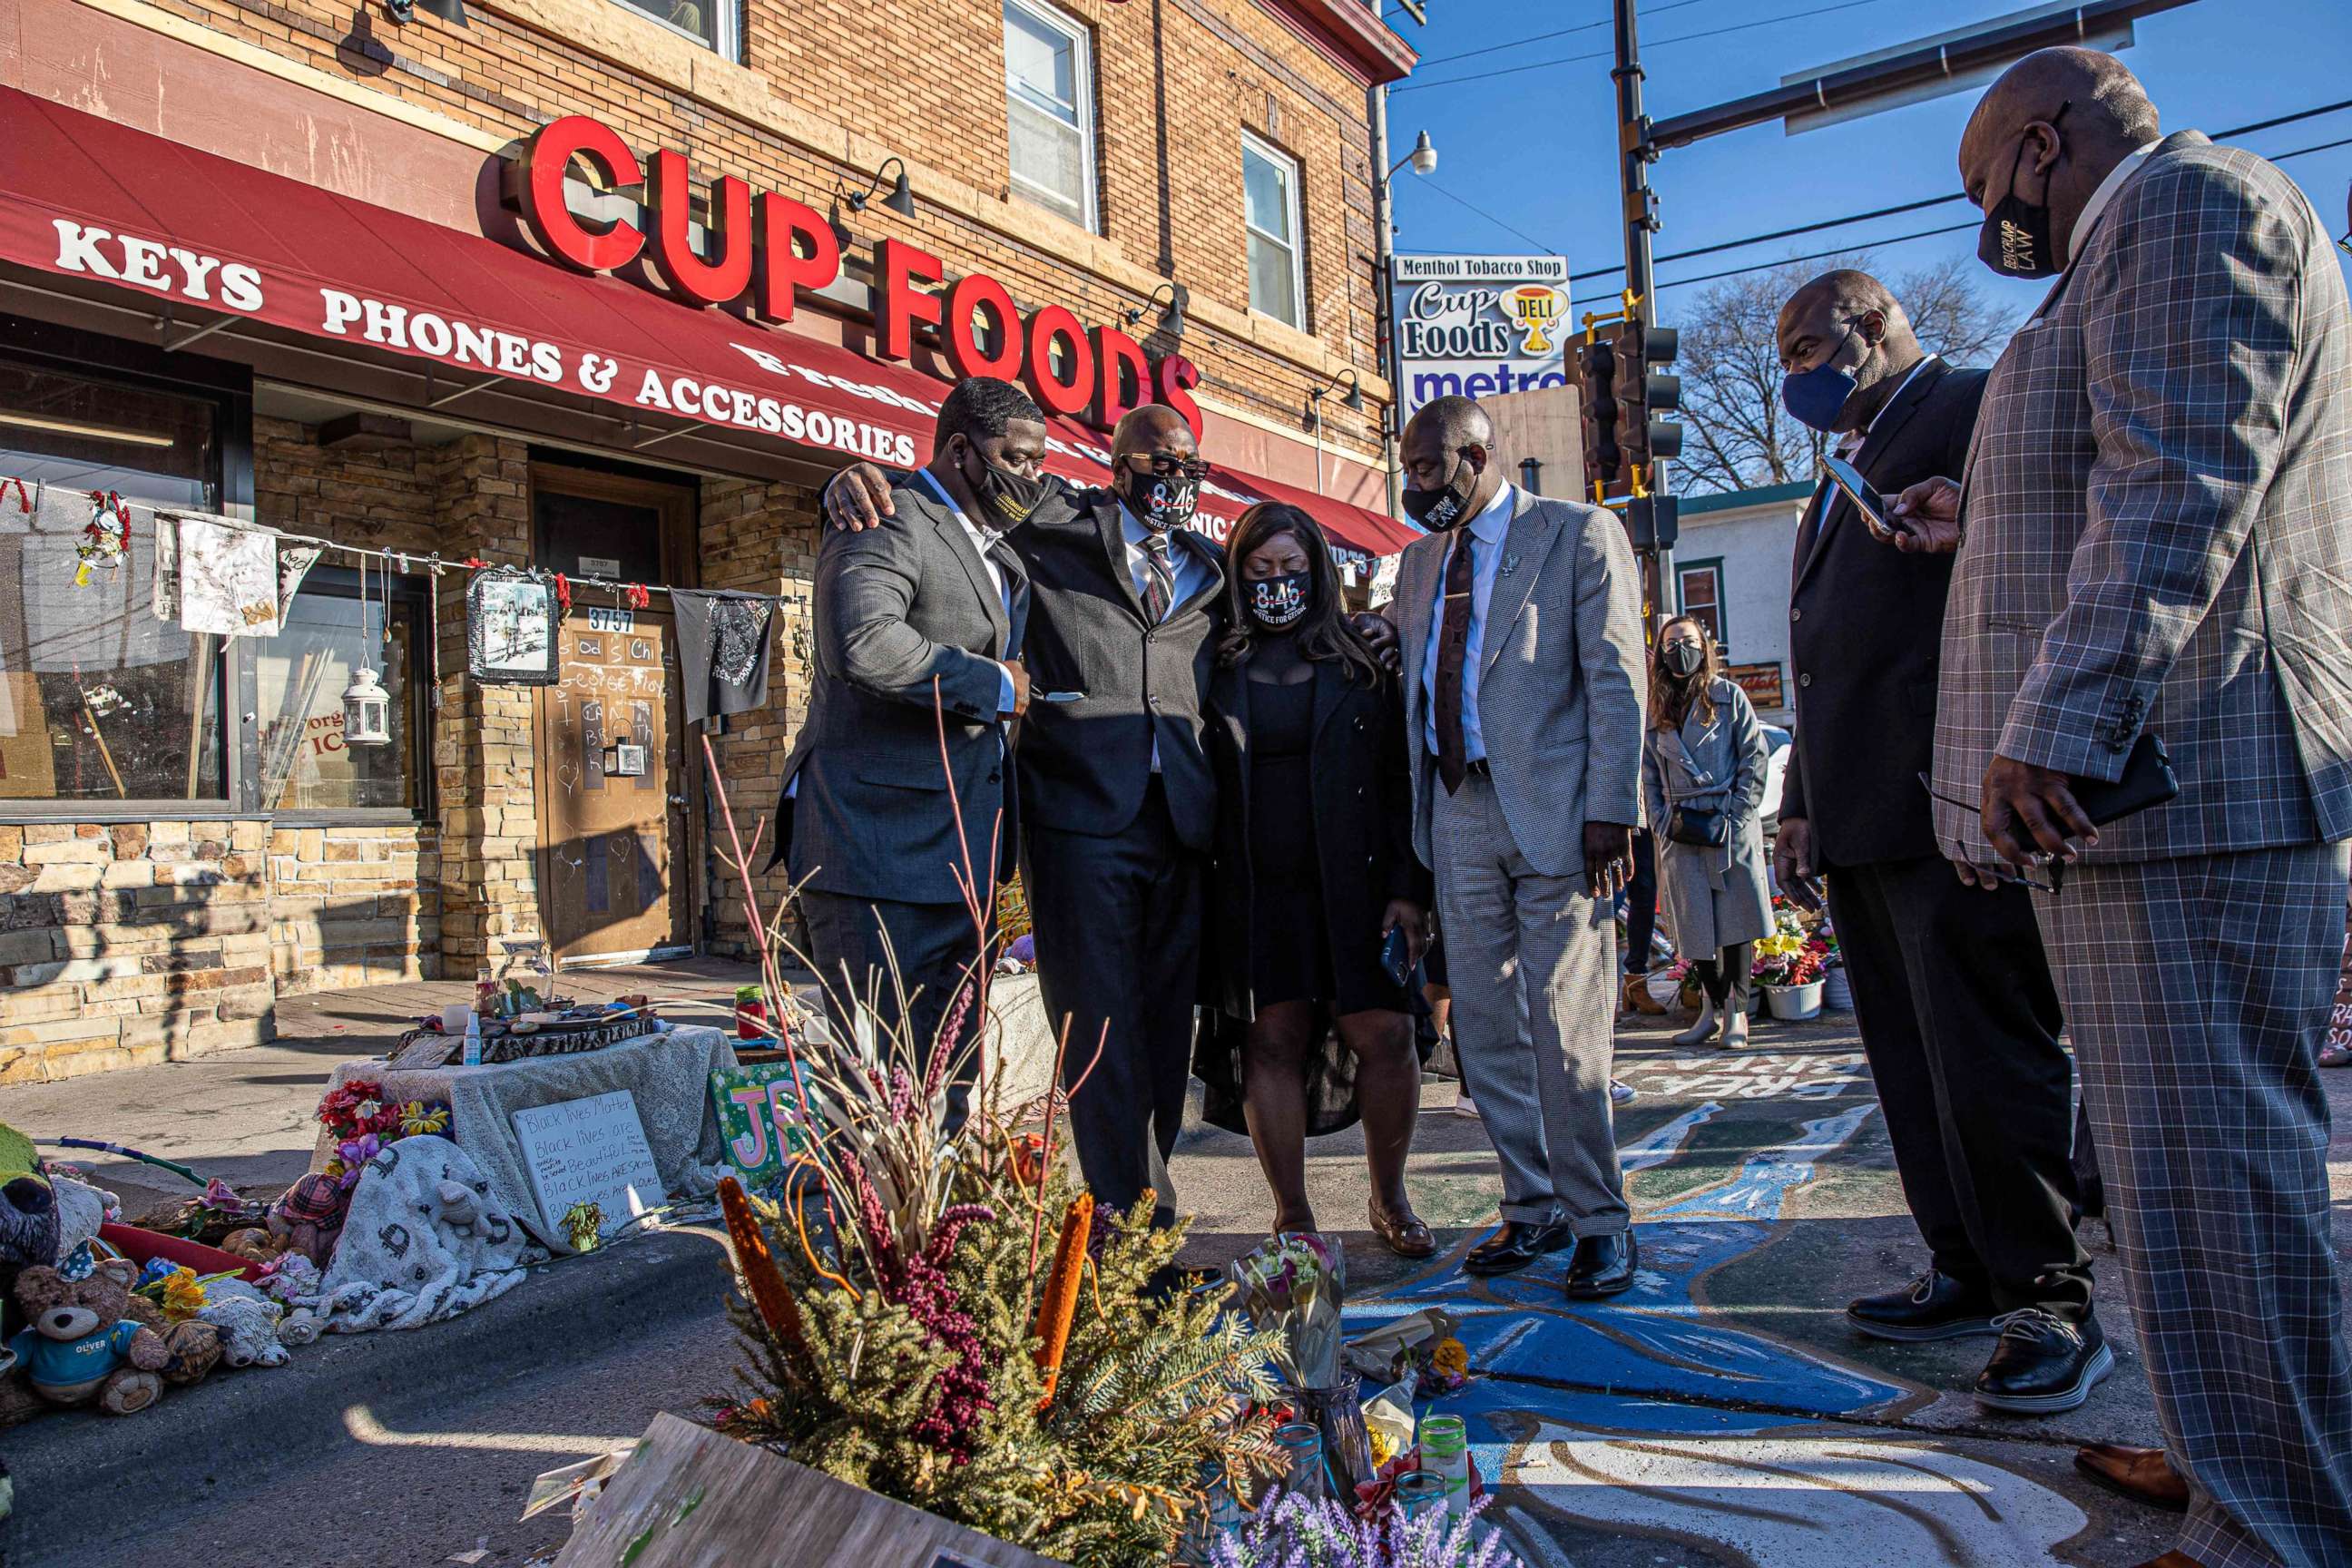 PHOTO: Members of George Floyd's family, including brother Philonise Floyd, and Floyd family lawyer Ben Crump visit a memorial at the site where George Floyd died while being arrested, after attending a press conference on March 12, 2021, in Minneapolis.